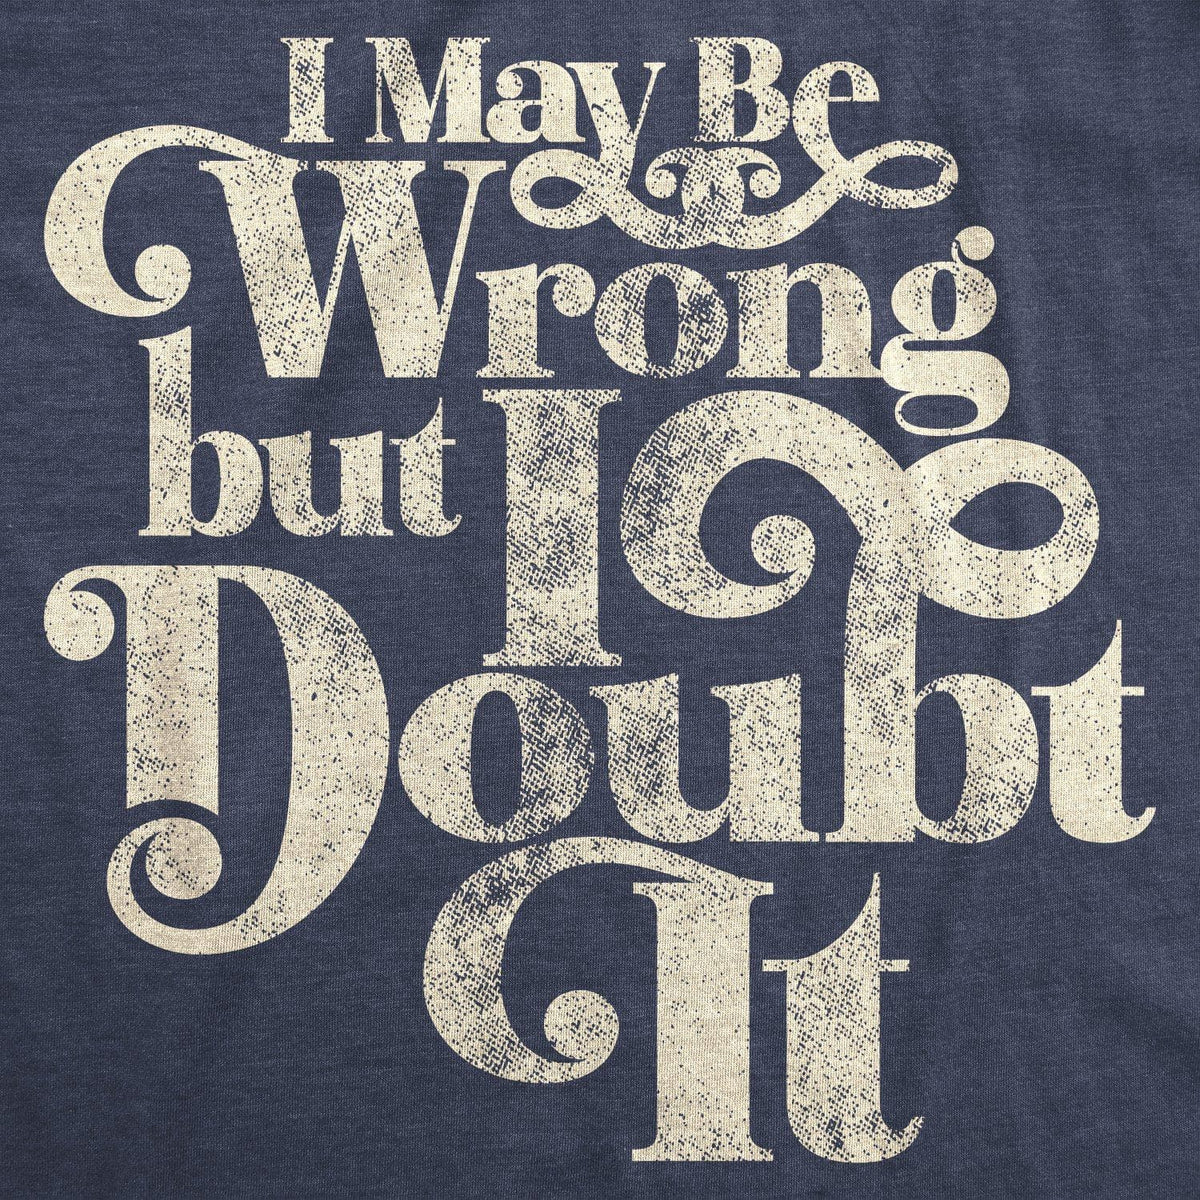 I May Be Wrong But I Doubt It Men&#39;s Tshirt  -  Crazy Dog T-Shirts